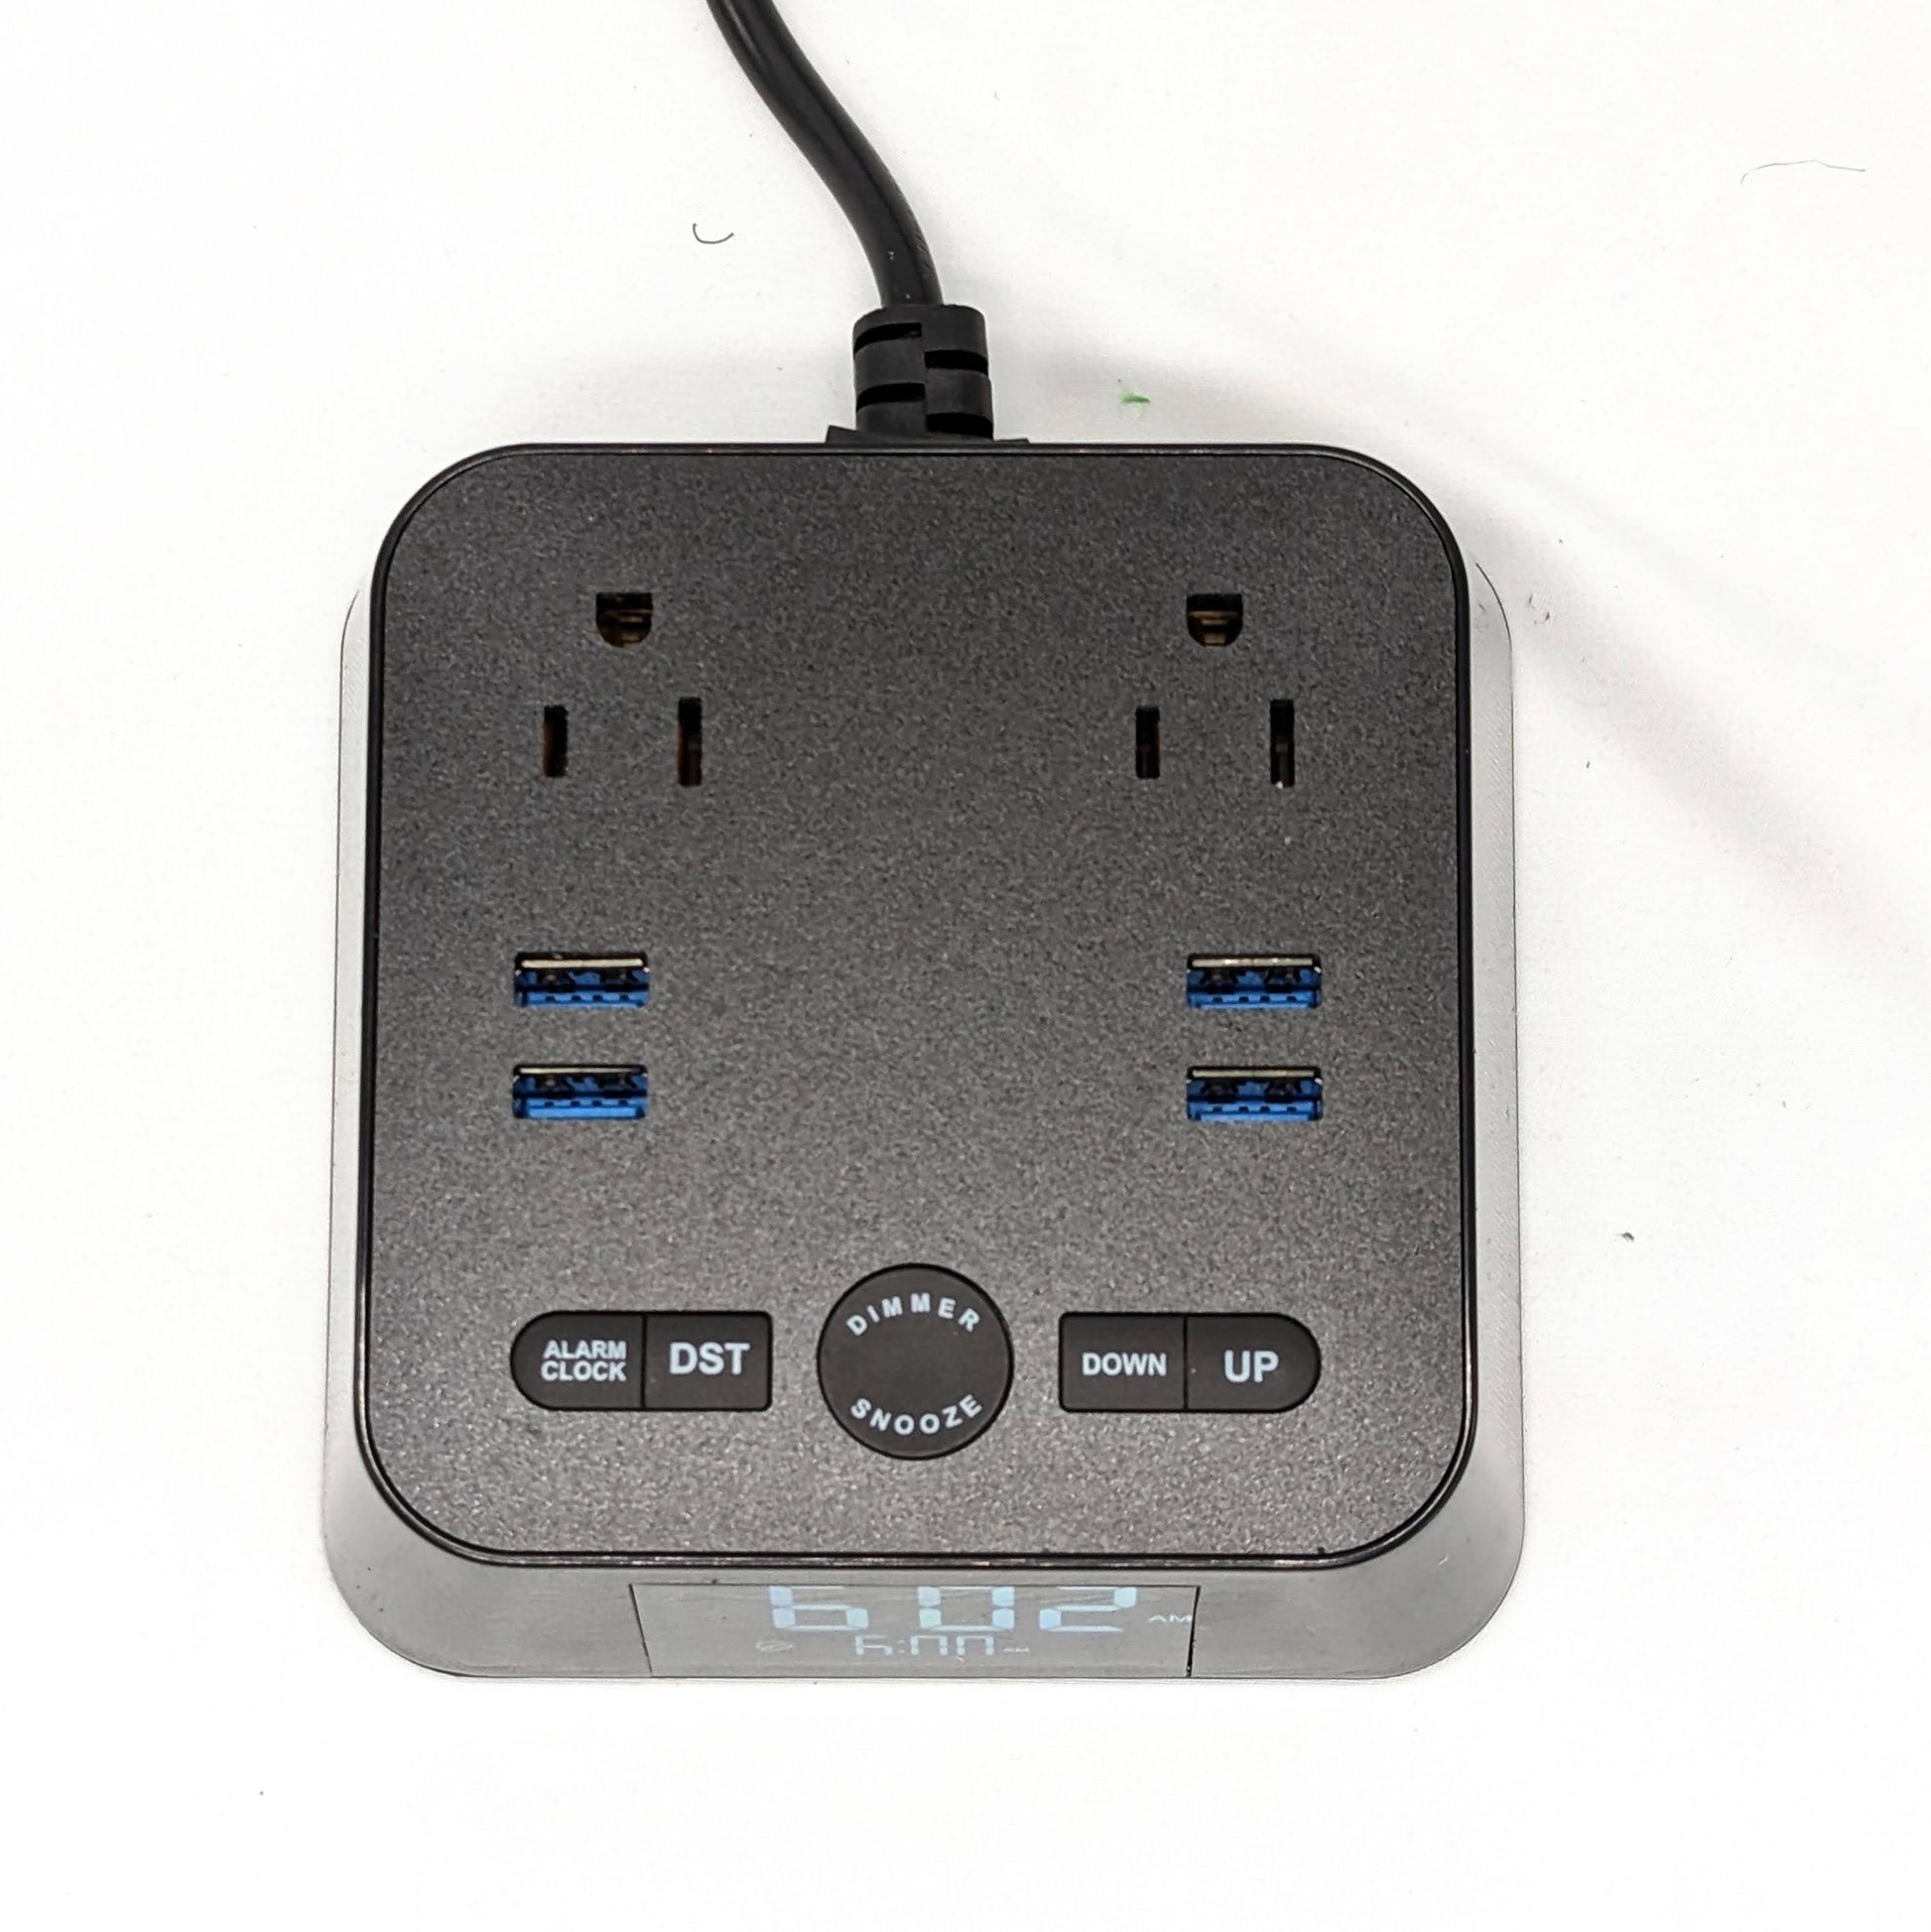 New! Power Hub Ultra with Alarm Clock - Charge up to 6 devices using 1 wall outlet - Great Useful Stuff - No Cover